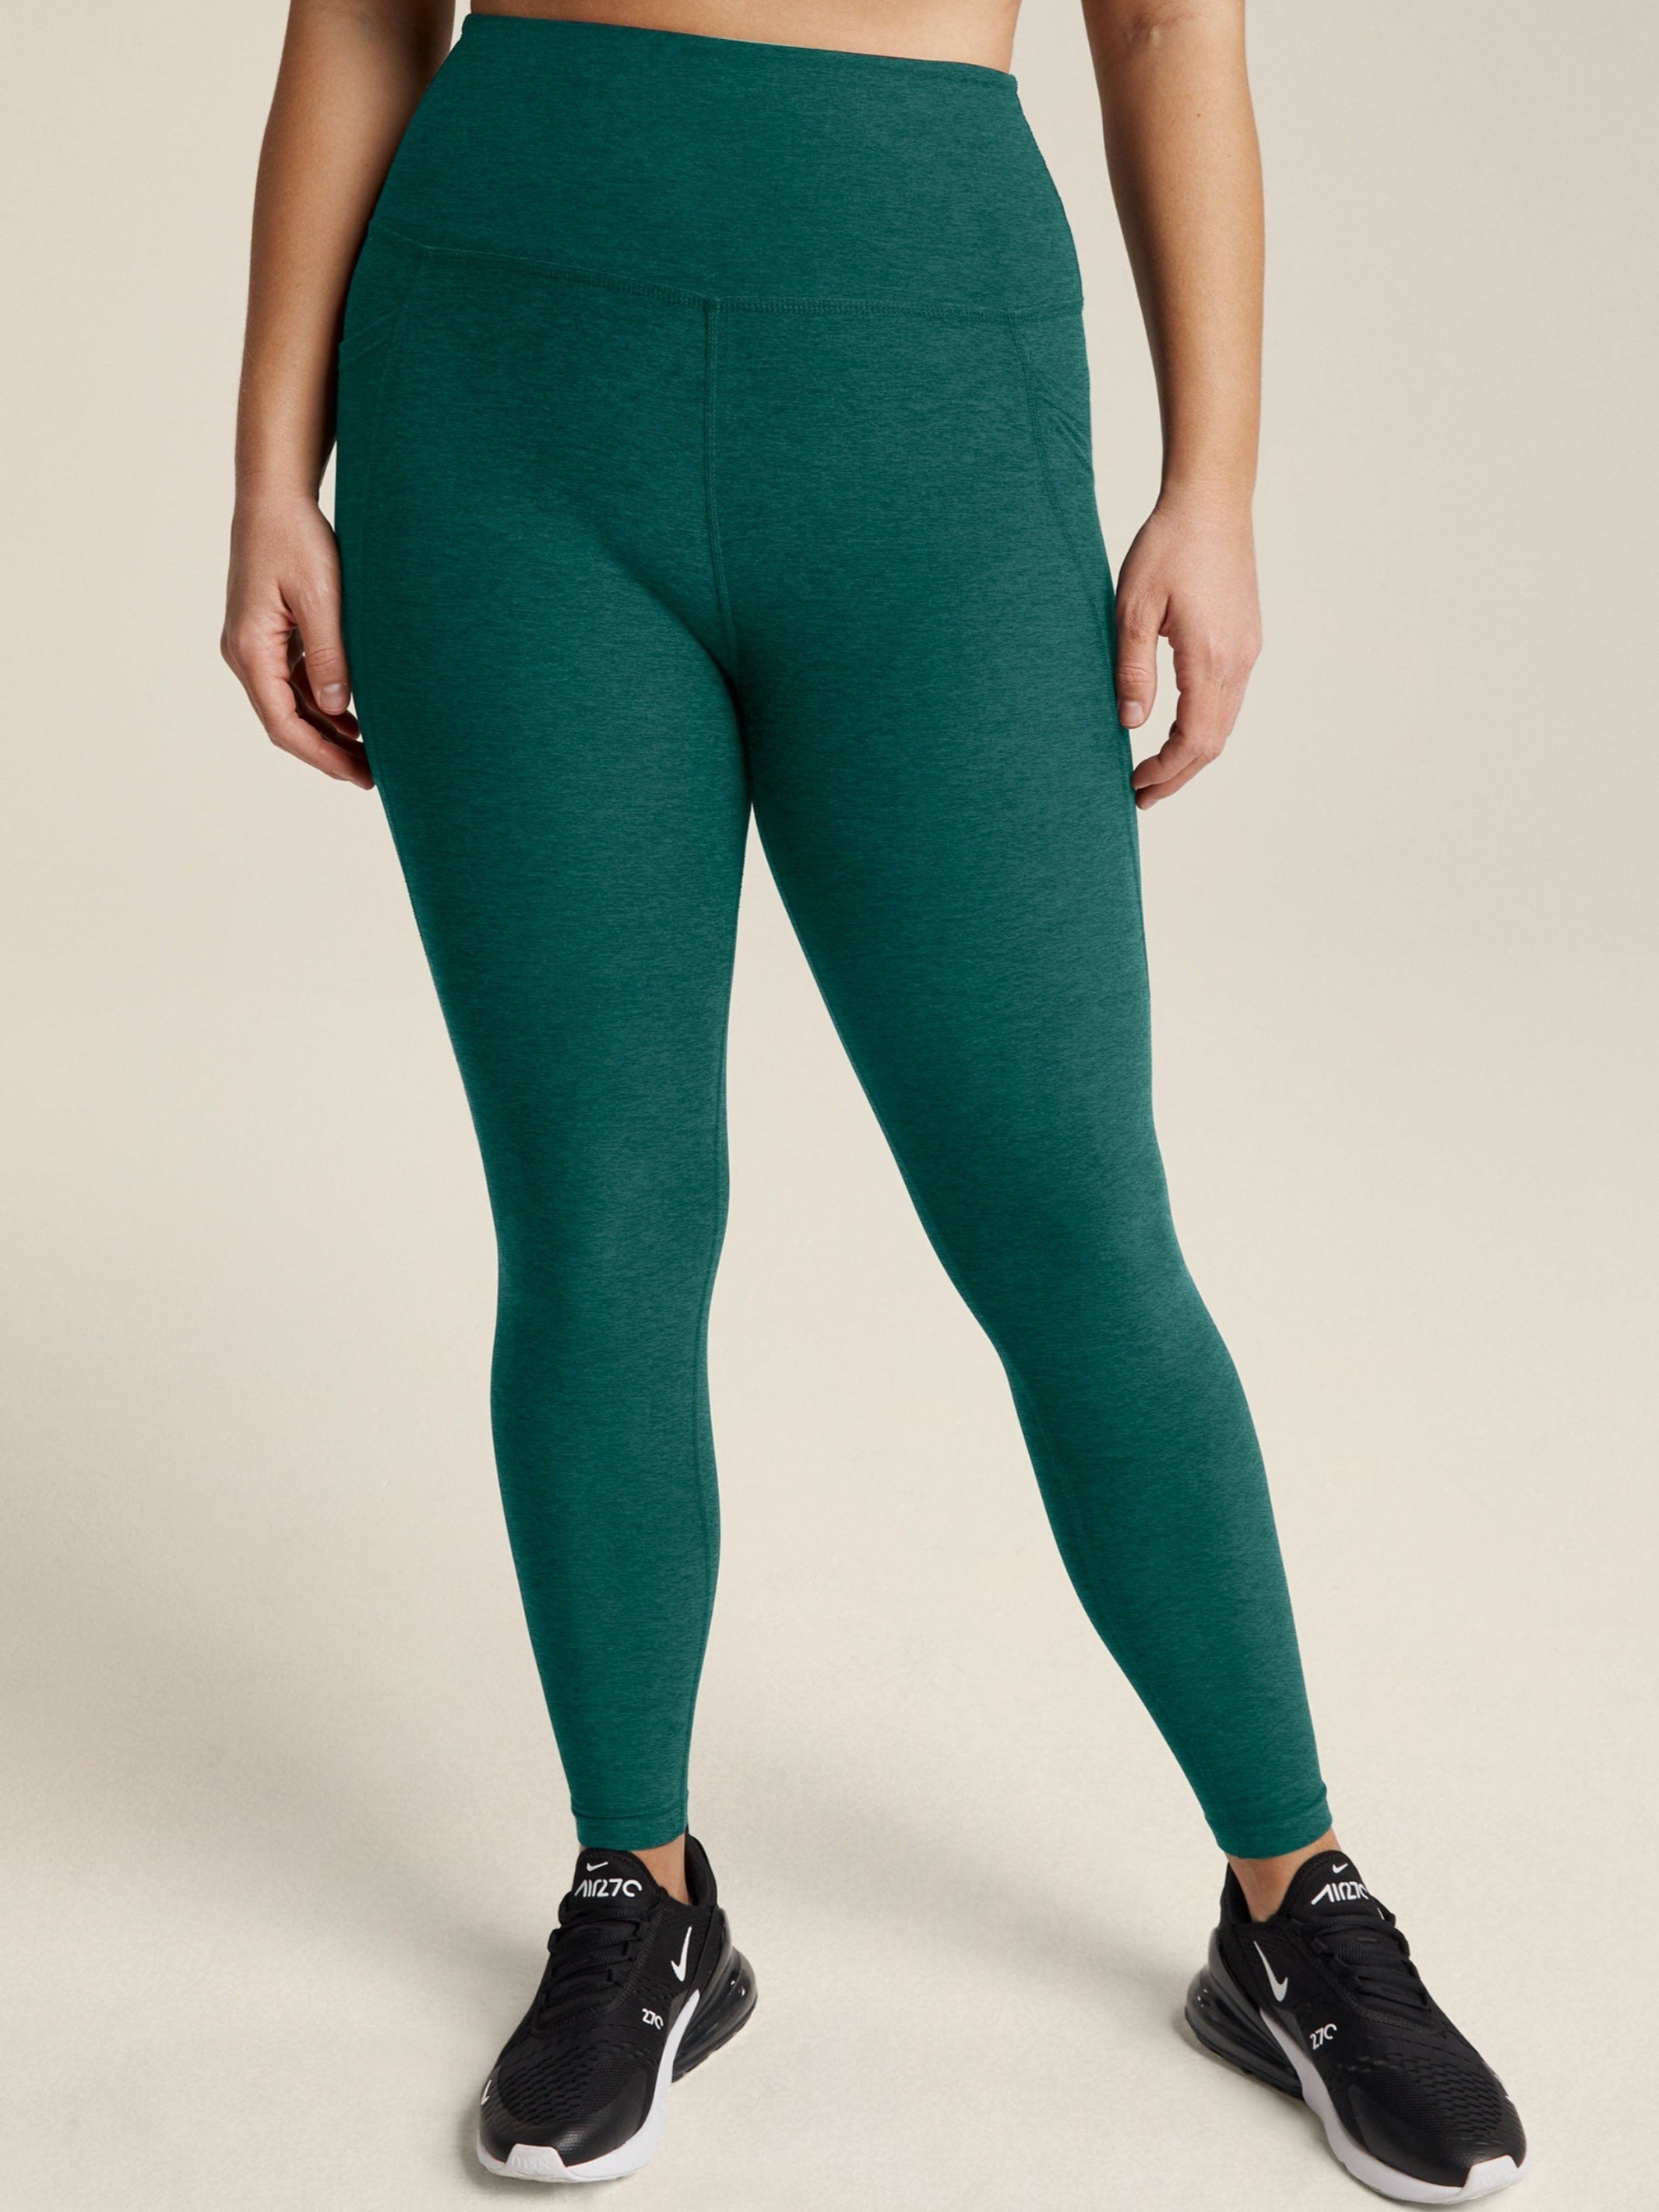 Beyond Yoga Spacedye Caught In The Midi High Waisted Legging in Lunar Teal  Heather, Teal. Size L (also in ).